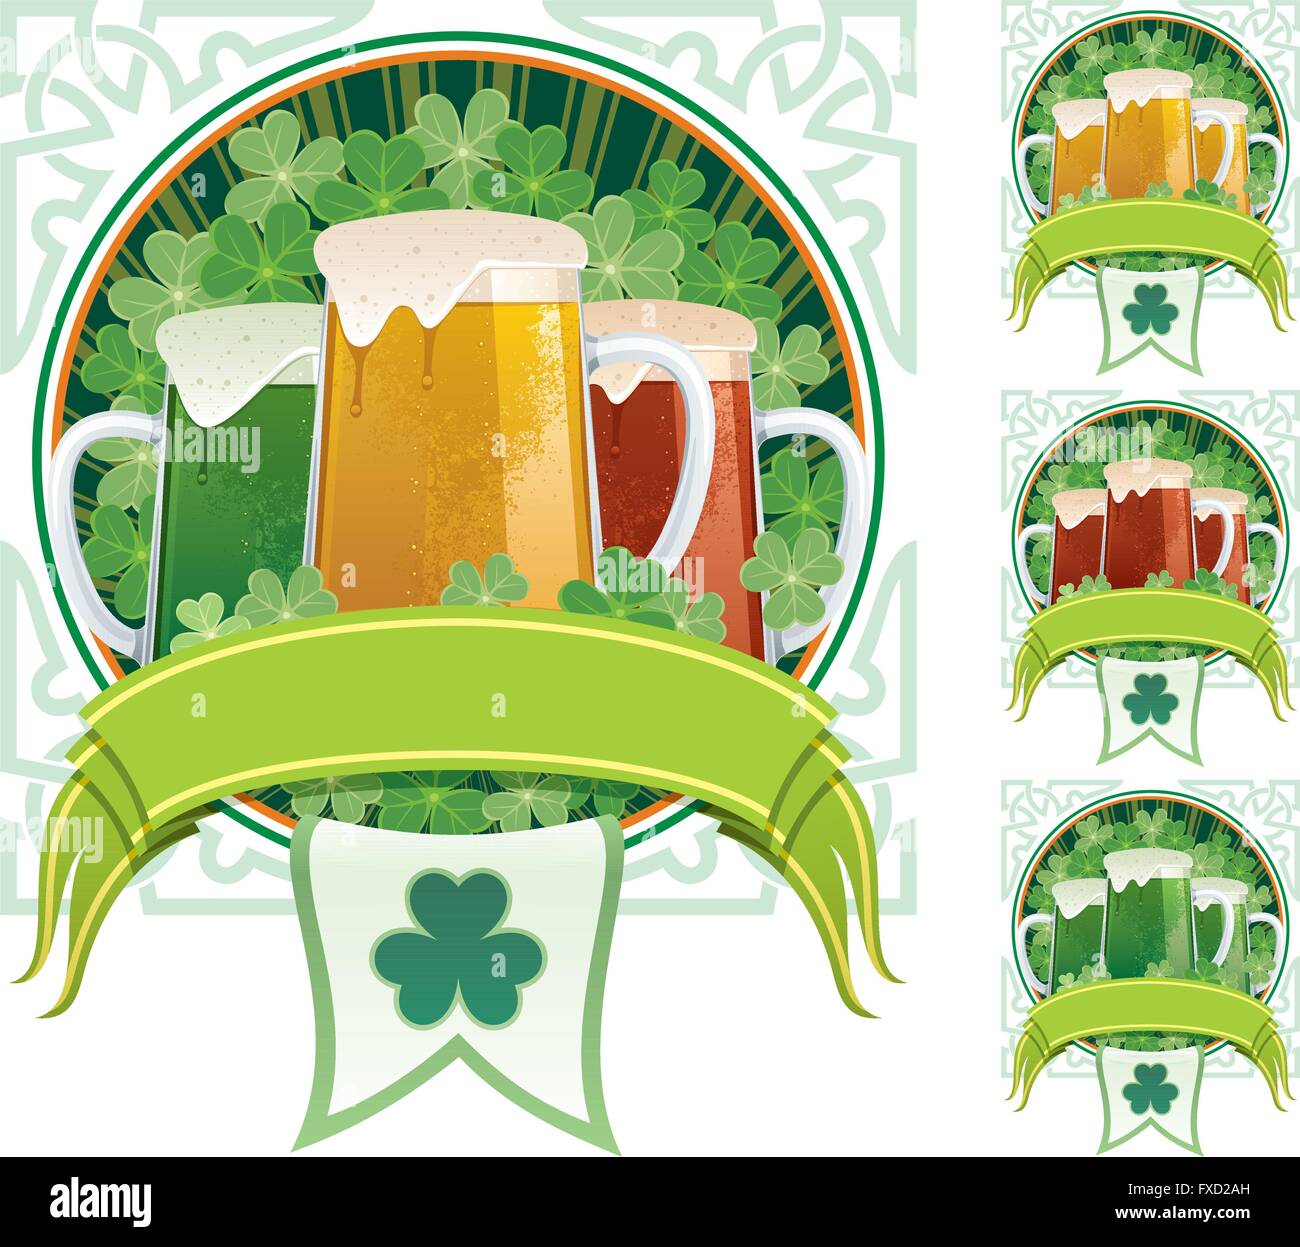 Three beer mugs on clover background with copy space under them. 3 additional versions are included on the right. Stock Vector